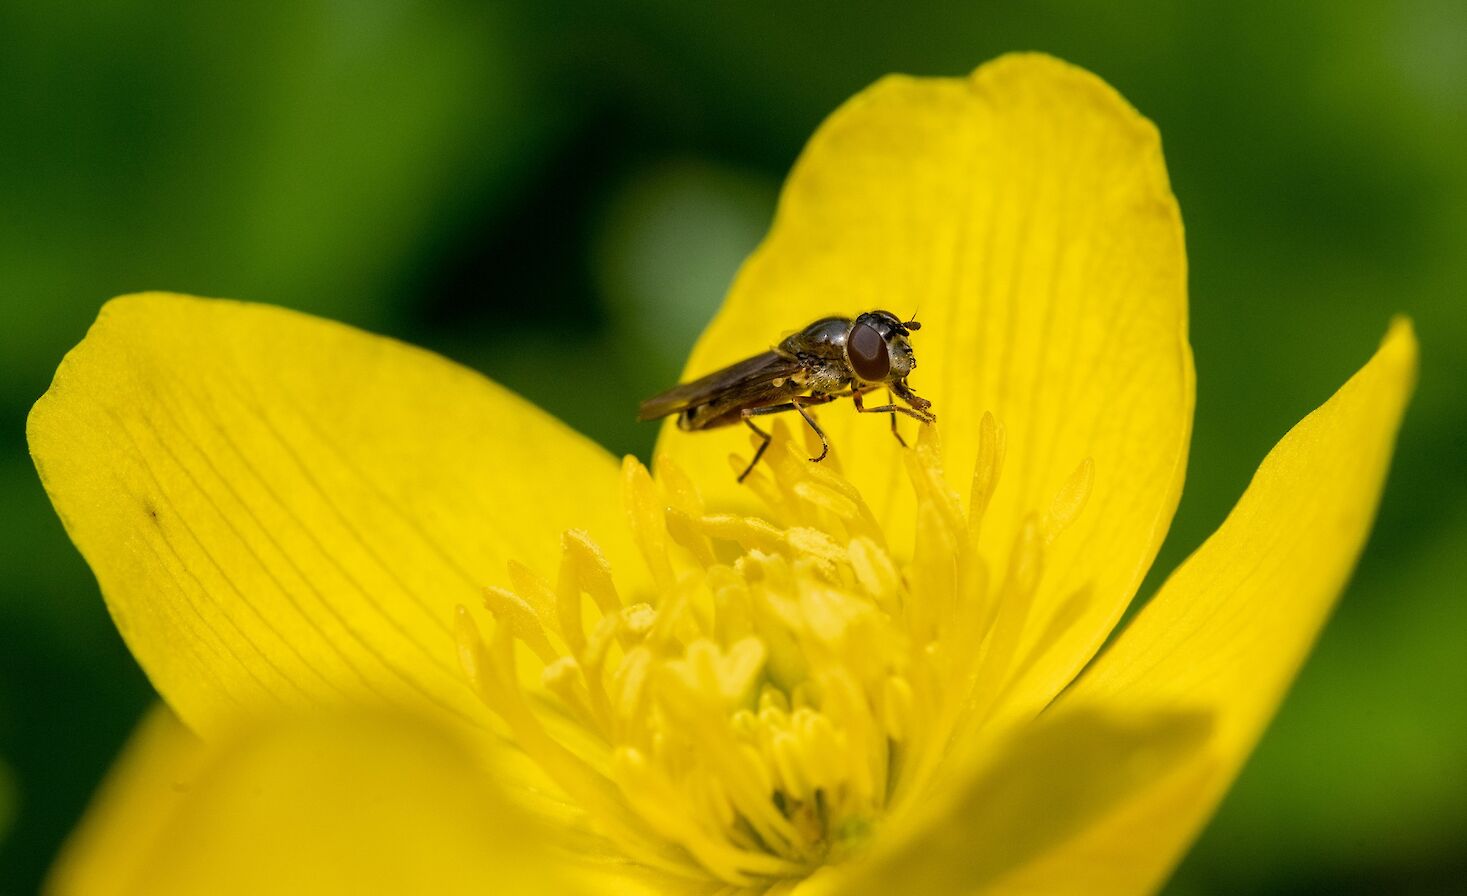 Hoverfly and marsh marigold - image by Raymond Besant